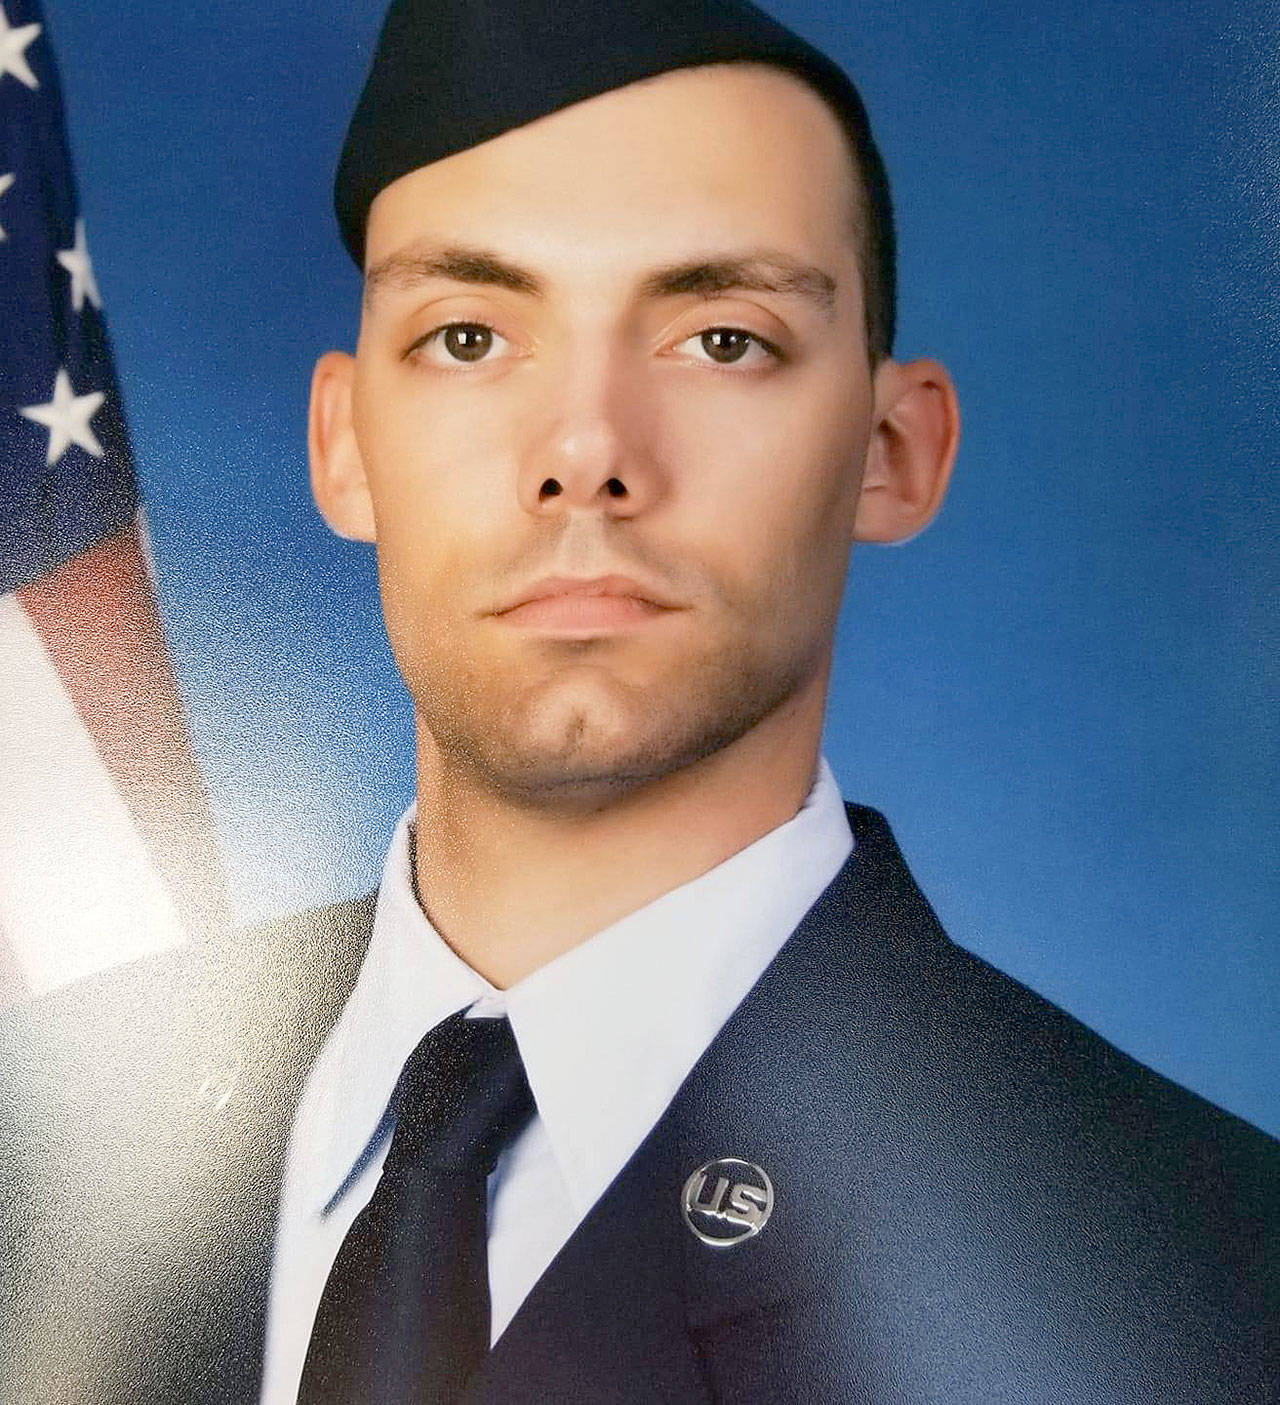 Airman Jesse M. L. Peterson. Submitted photo.